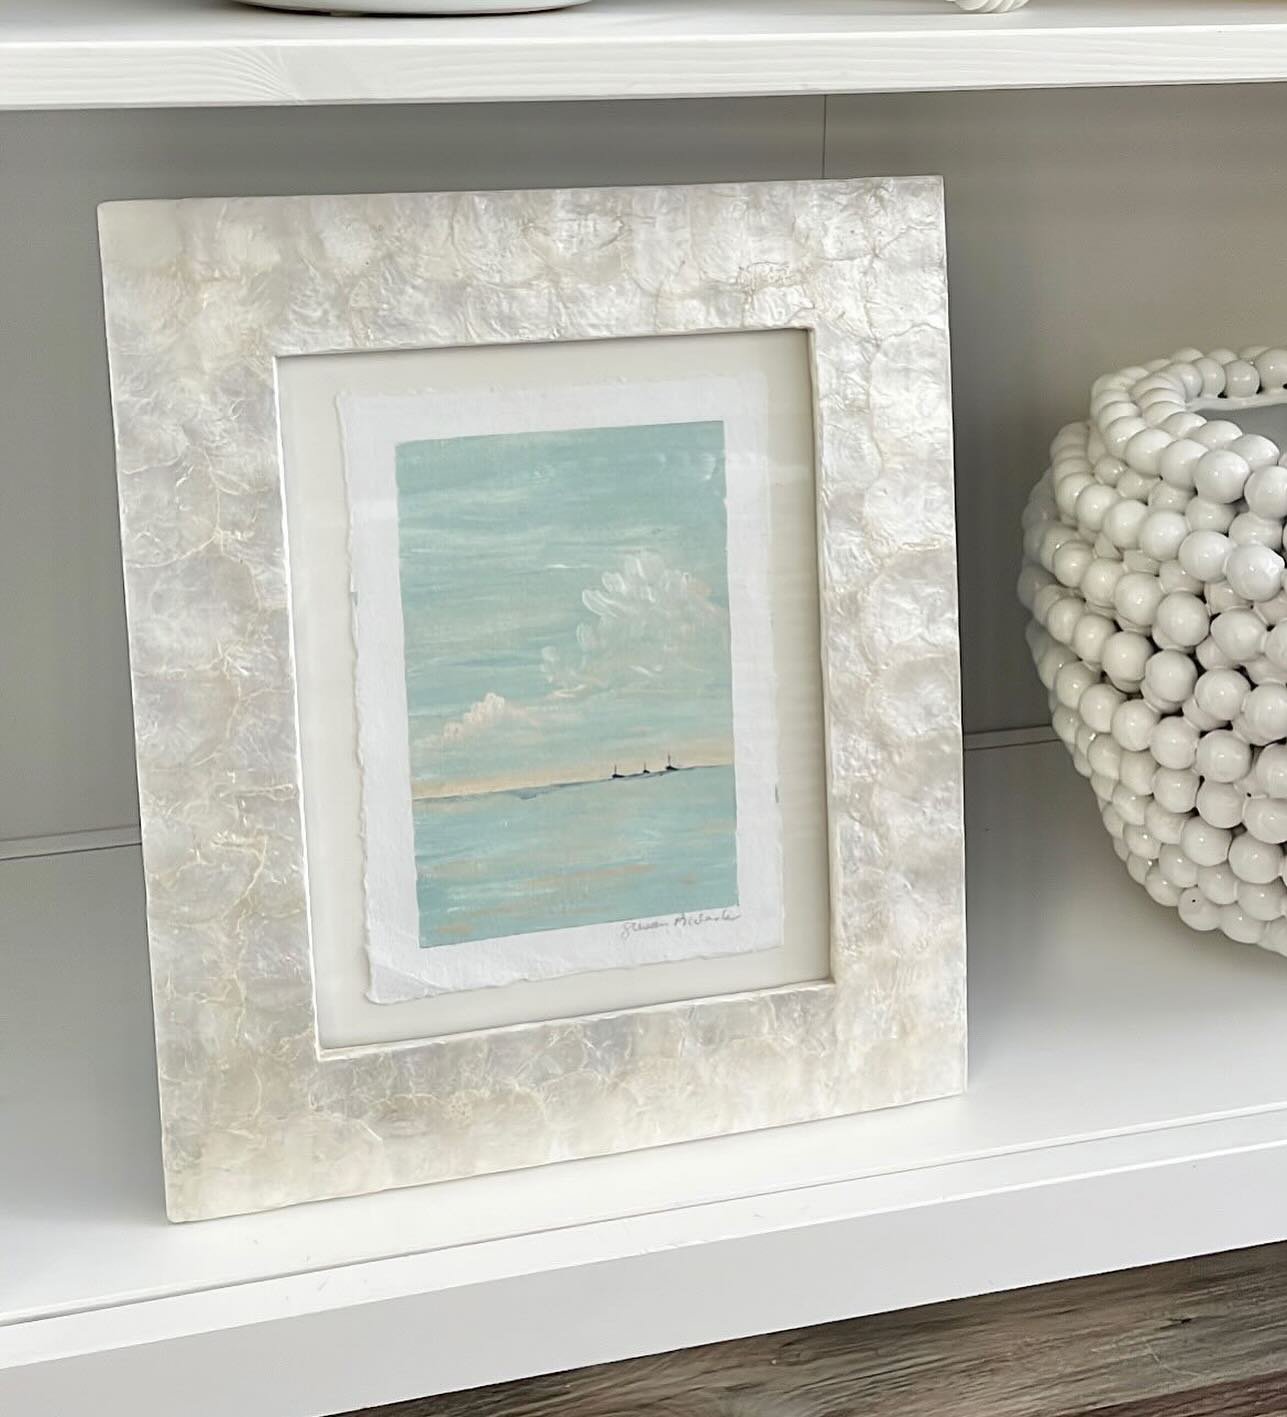 Such a joy when an original makes it to a store I adore and support. This On the Horizon original is available @thacherandspring. Give them a follow. 🌊 

Prints for this piece are available in all sizes. 

#blueandwhiteart #coastalhomedecor #coastal